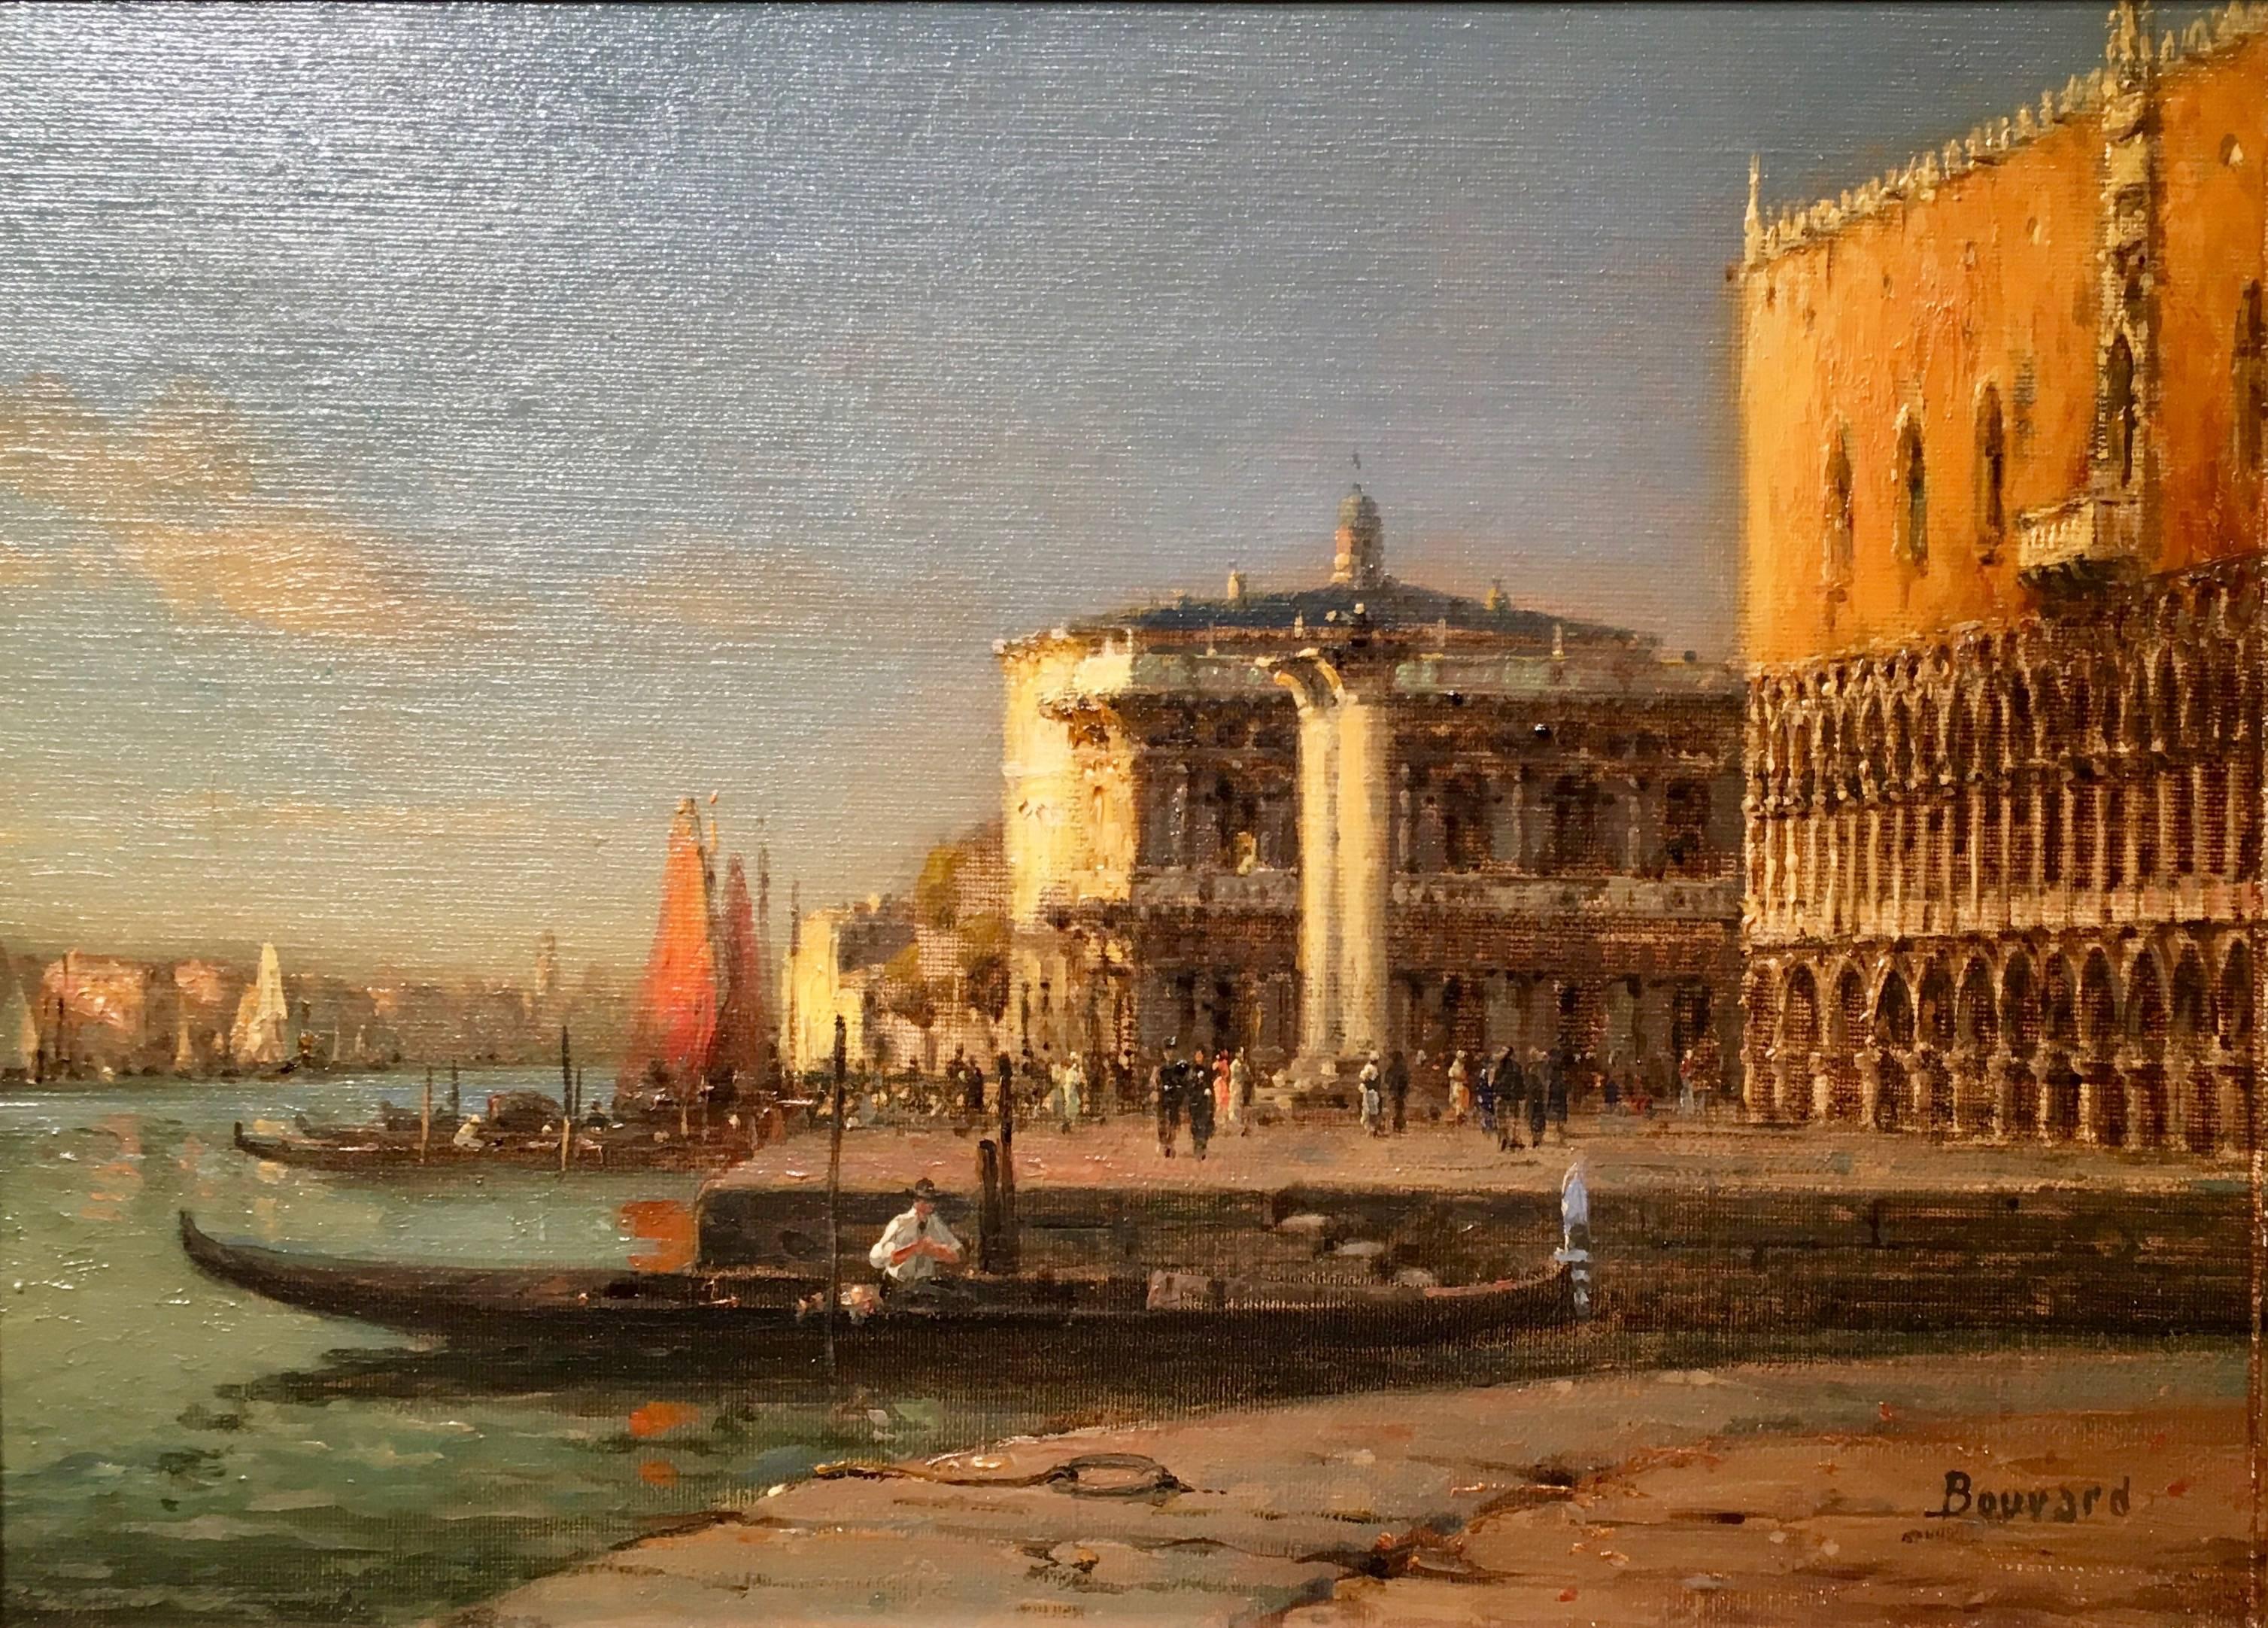 By St.Marks, Venice Italy - Painting by Antoine Bouvard (Marc Aldine)